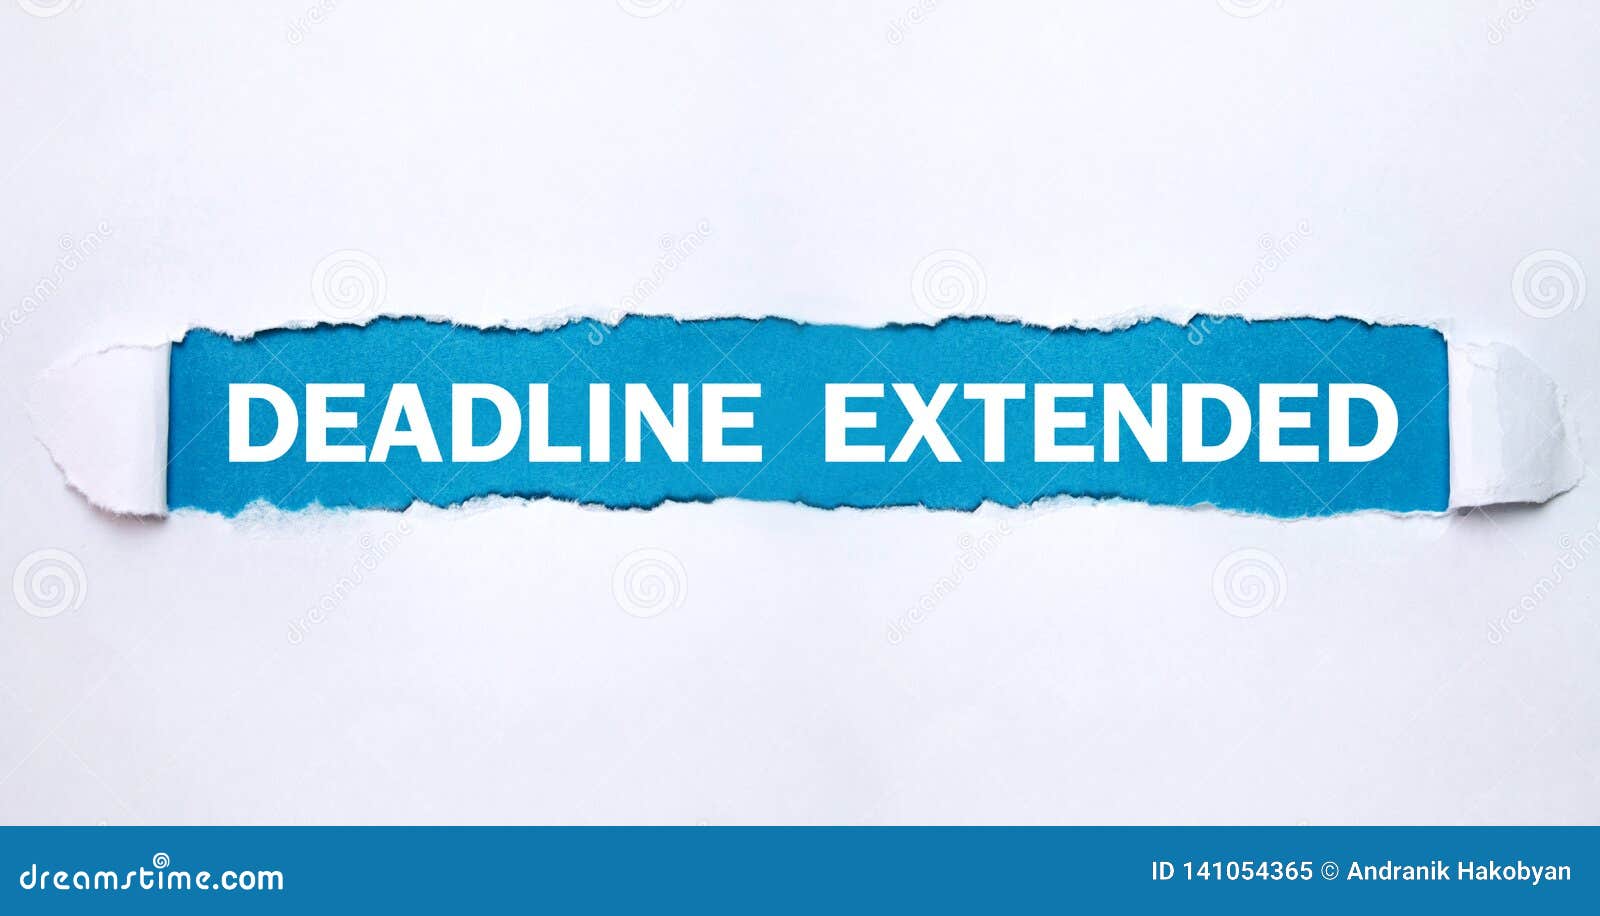 deadline extended text on torn paper